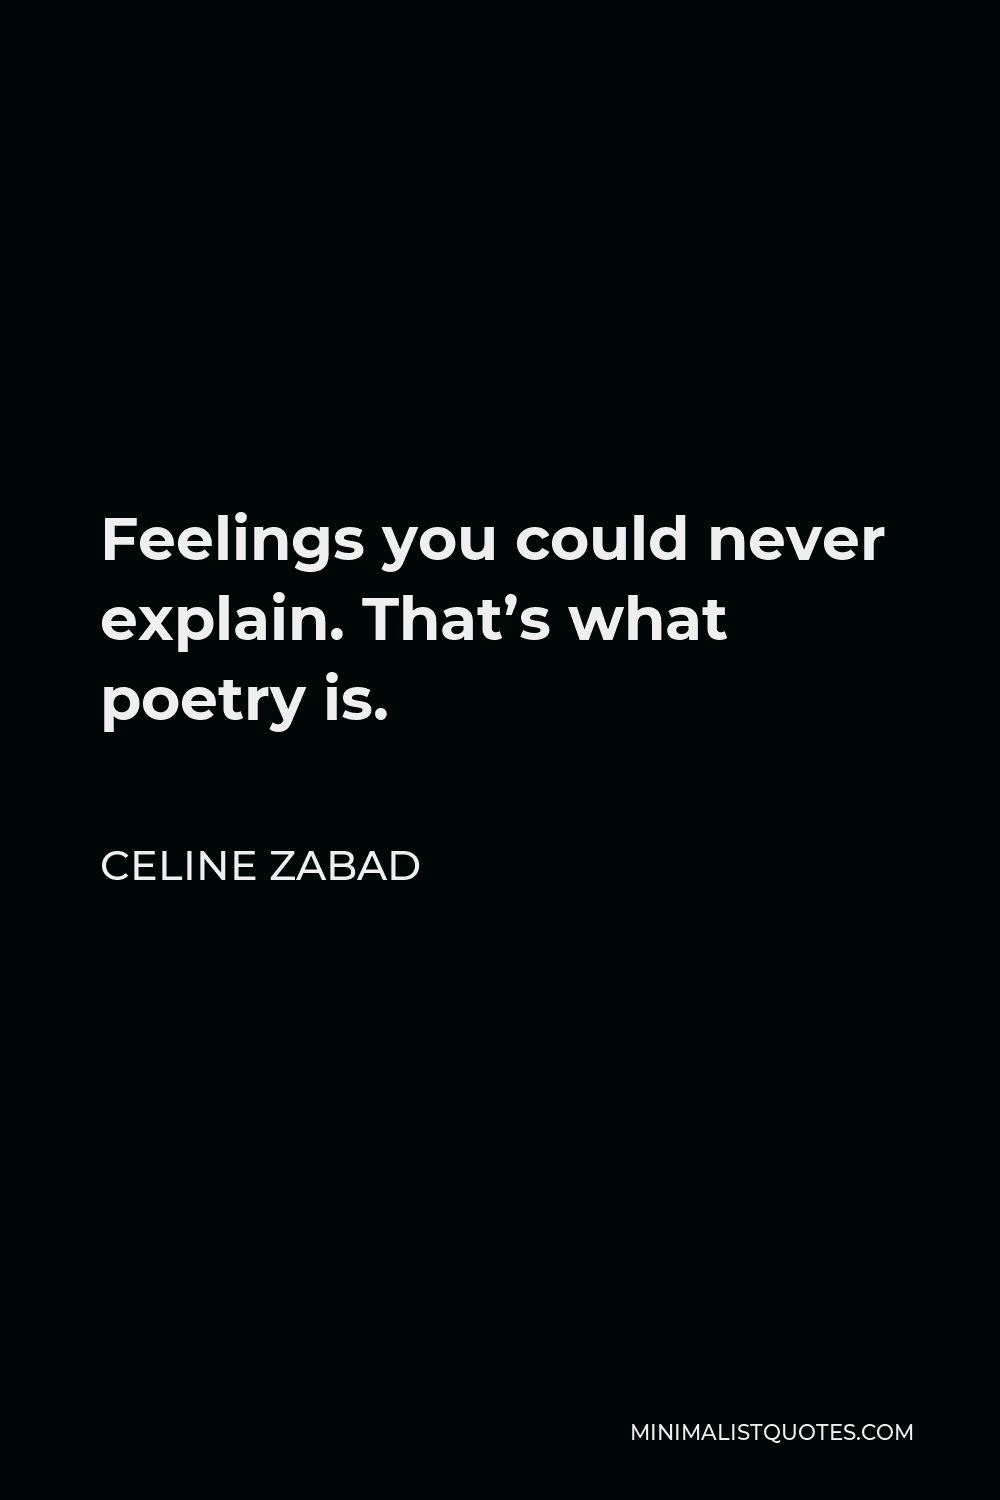 Celine Zabad Quote - Feelings you could never explain. That’s what poetry is.